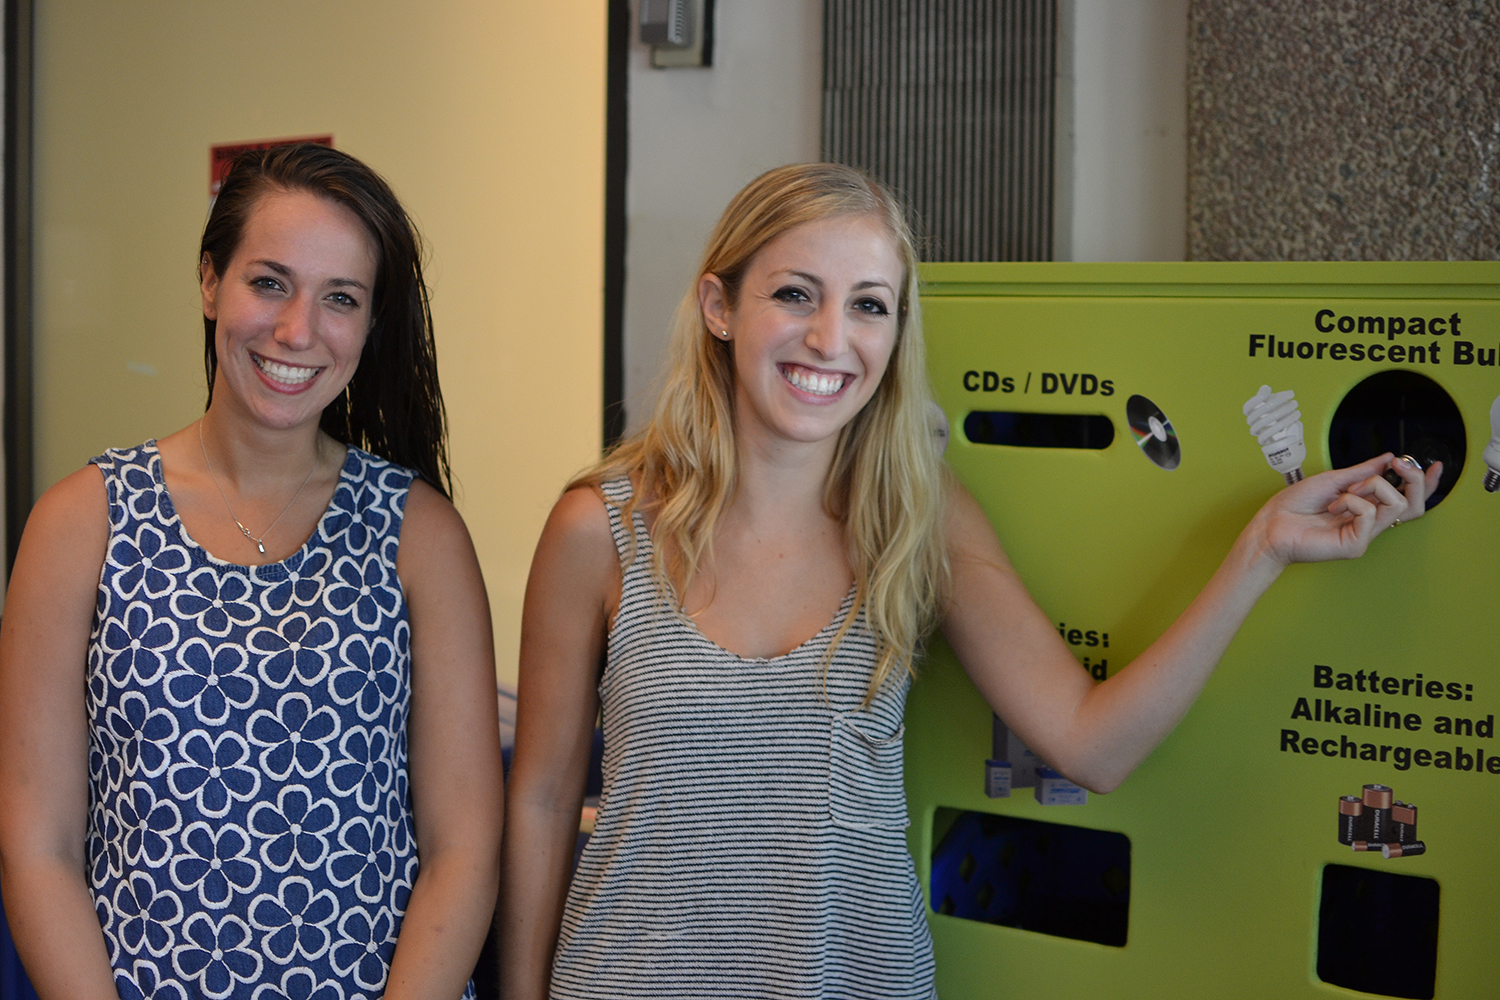 Tess Litchman '16 and Maya Berkman '16 were all smiles as they used the new center to recycle an old fluorescent light bulb.